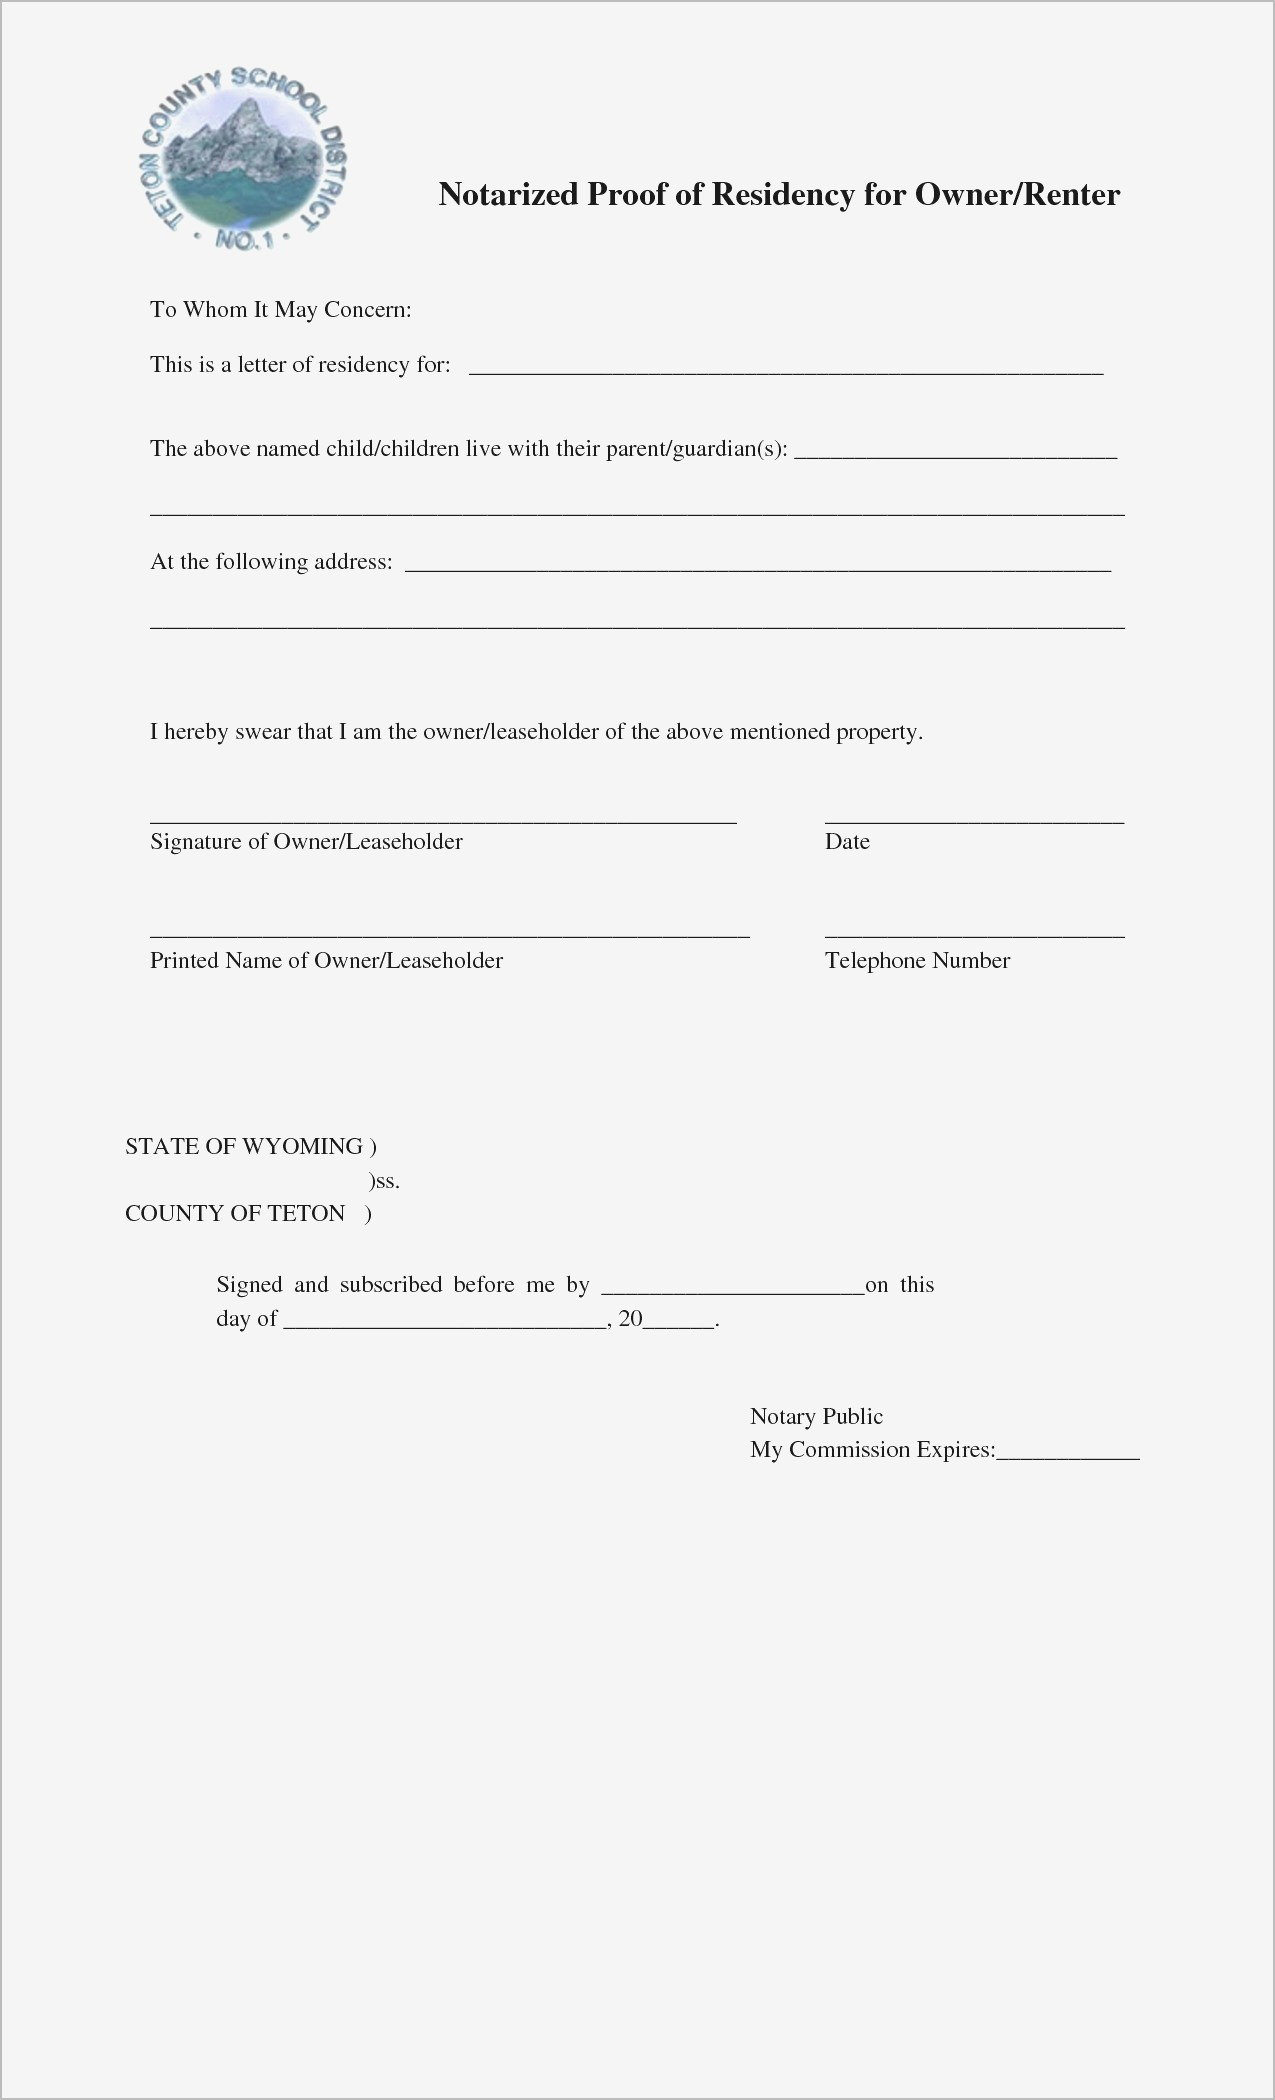 proof-of-residency-letter-notarized-template-samples-letter-template